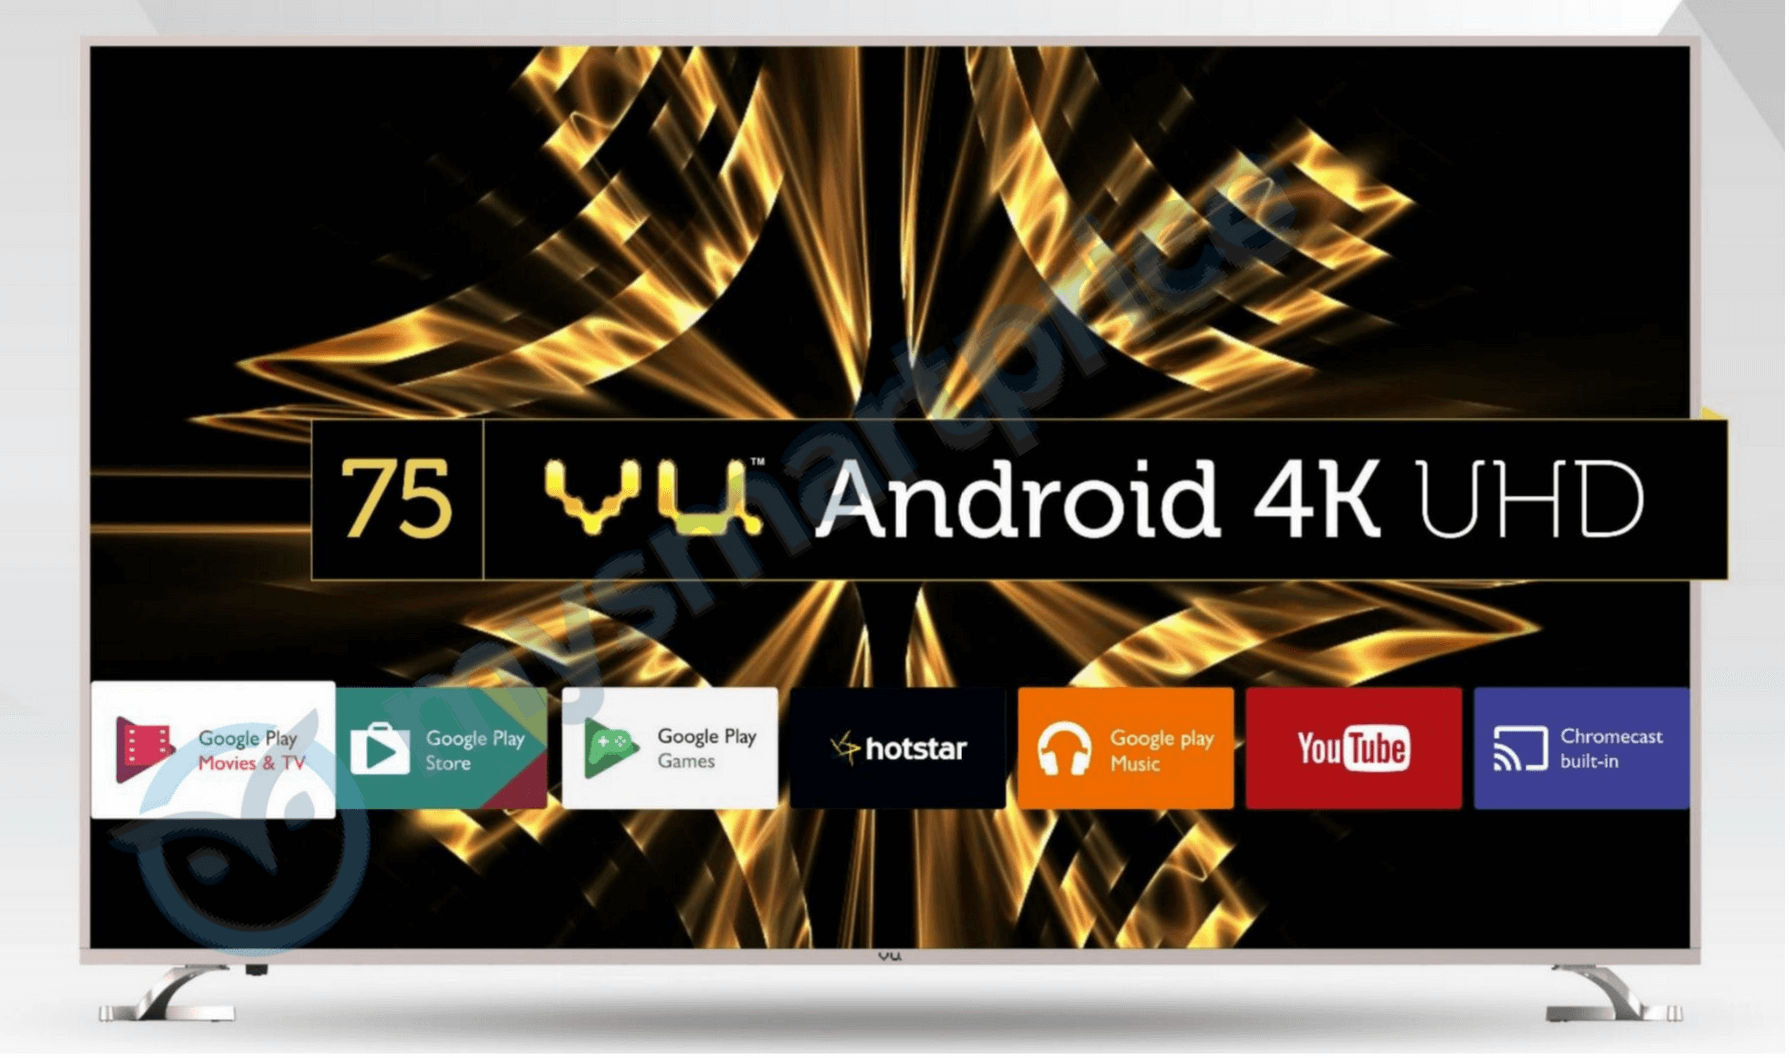 [EXCLUSIVE] Vu to Launch 100-inch, 75-inch, 65-inch 4K Android 8.0 Smart TVs in India - MySmartPrice